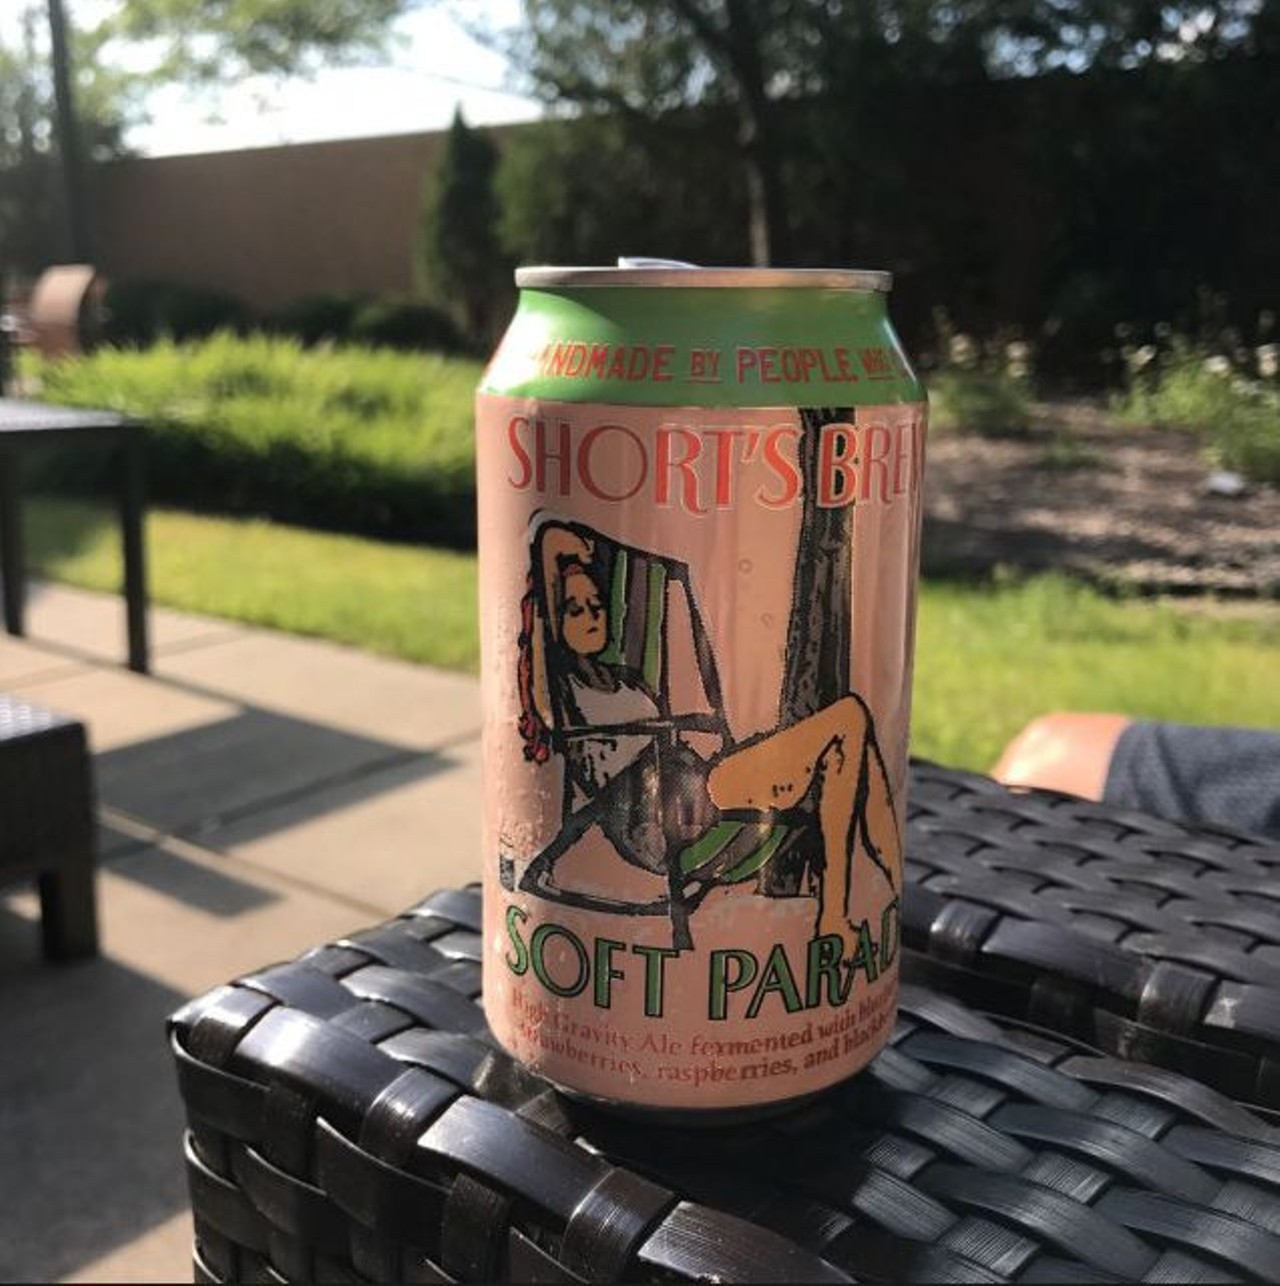 Soft Paradise 
ABV: 7.5% 
One of our favorites from the brewery in Belaire, Soft Parade is made with a variety of fruits, but fortunately isn't too sweet like some fruit beers can be. Soft Parade does have a pretty high ABV, so just drink a few because they tend to sneak up on you.